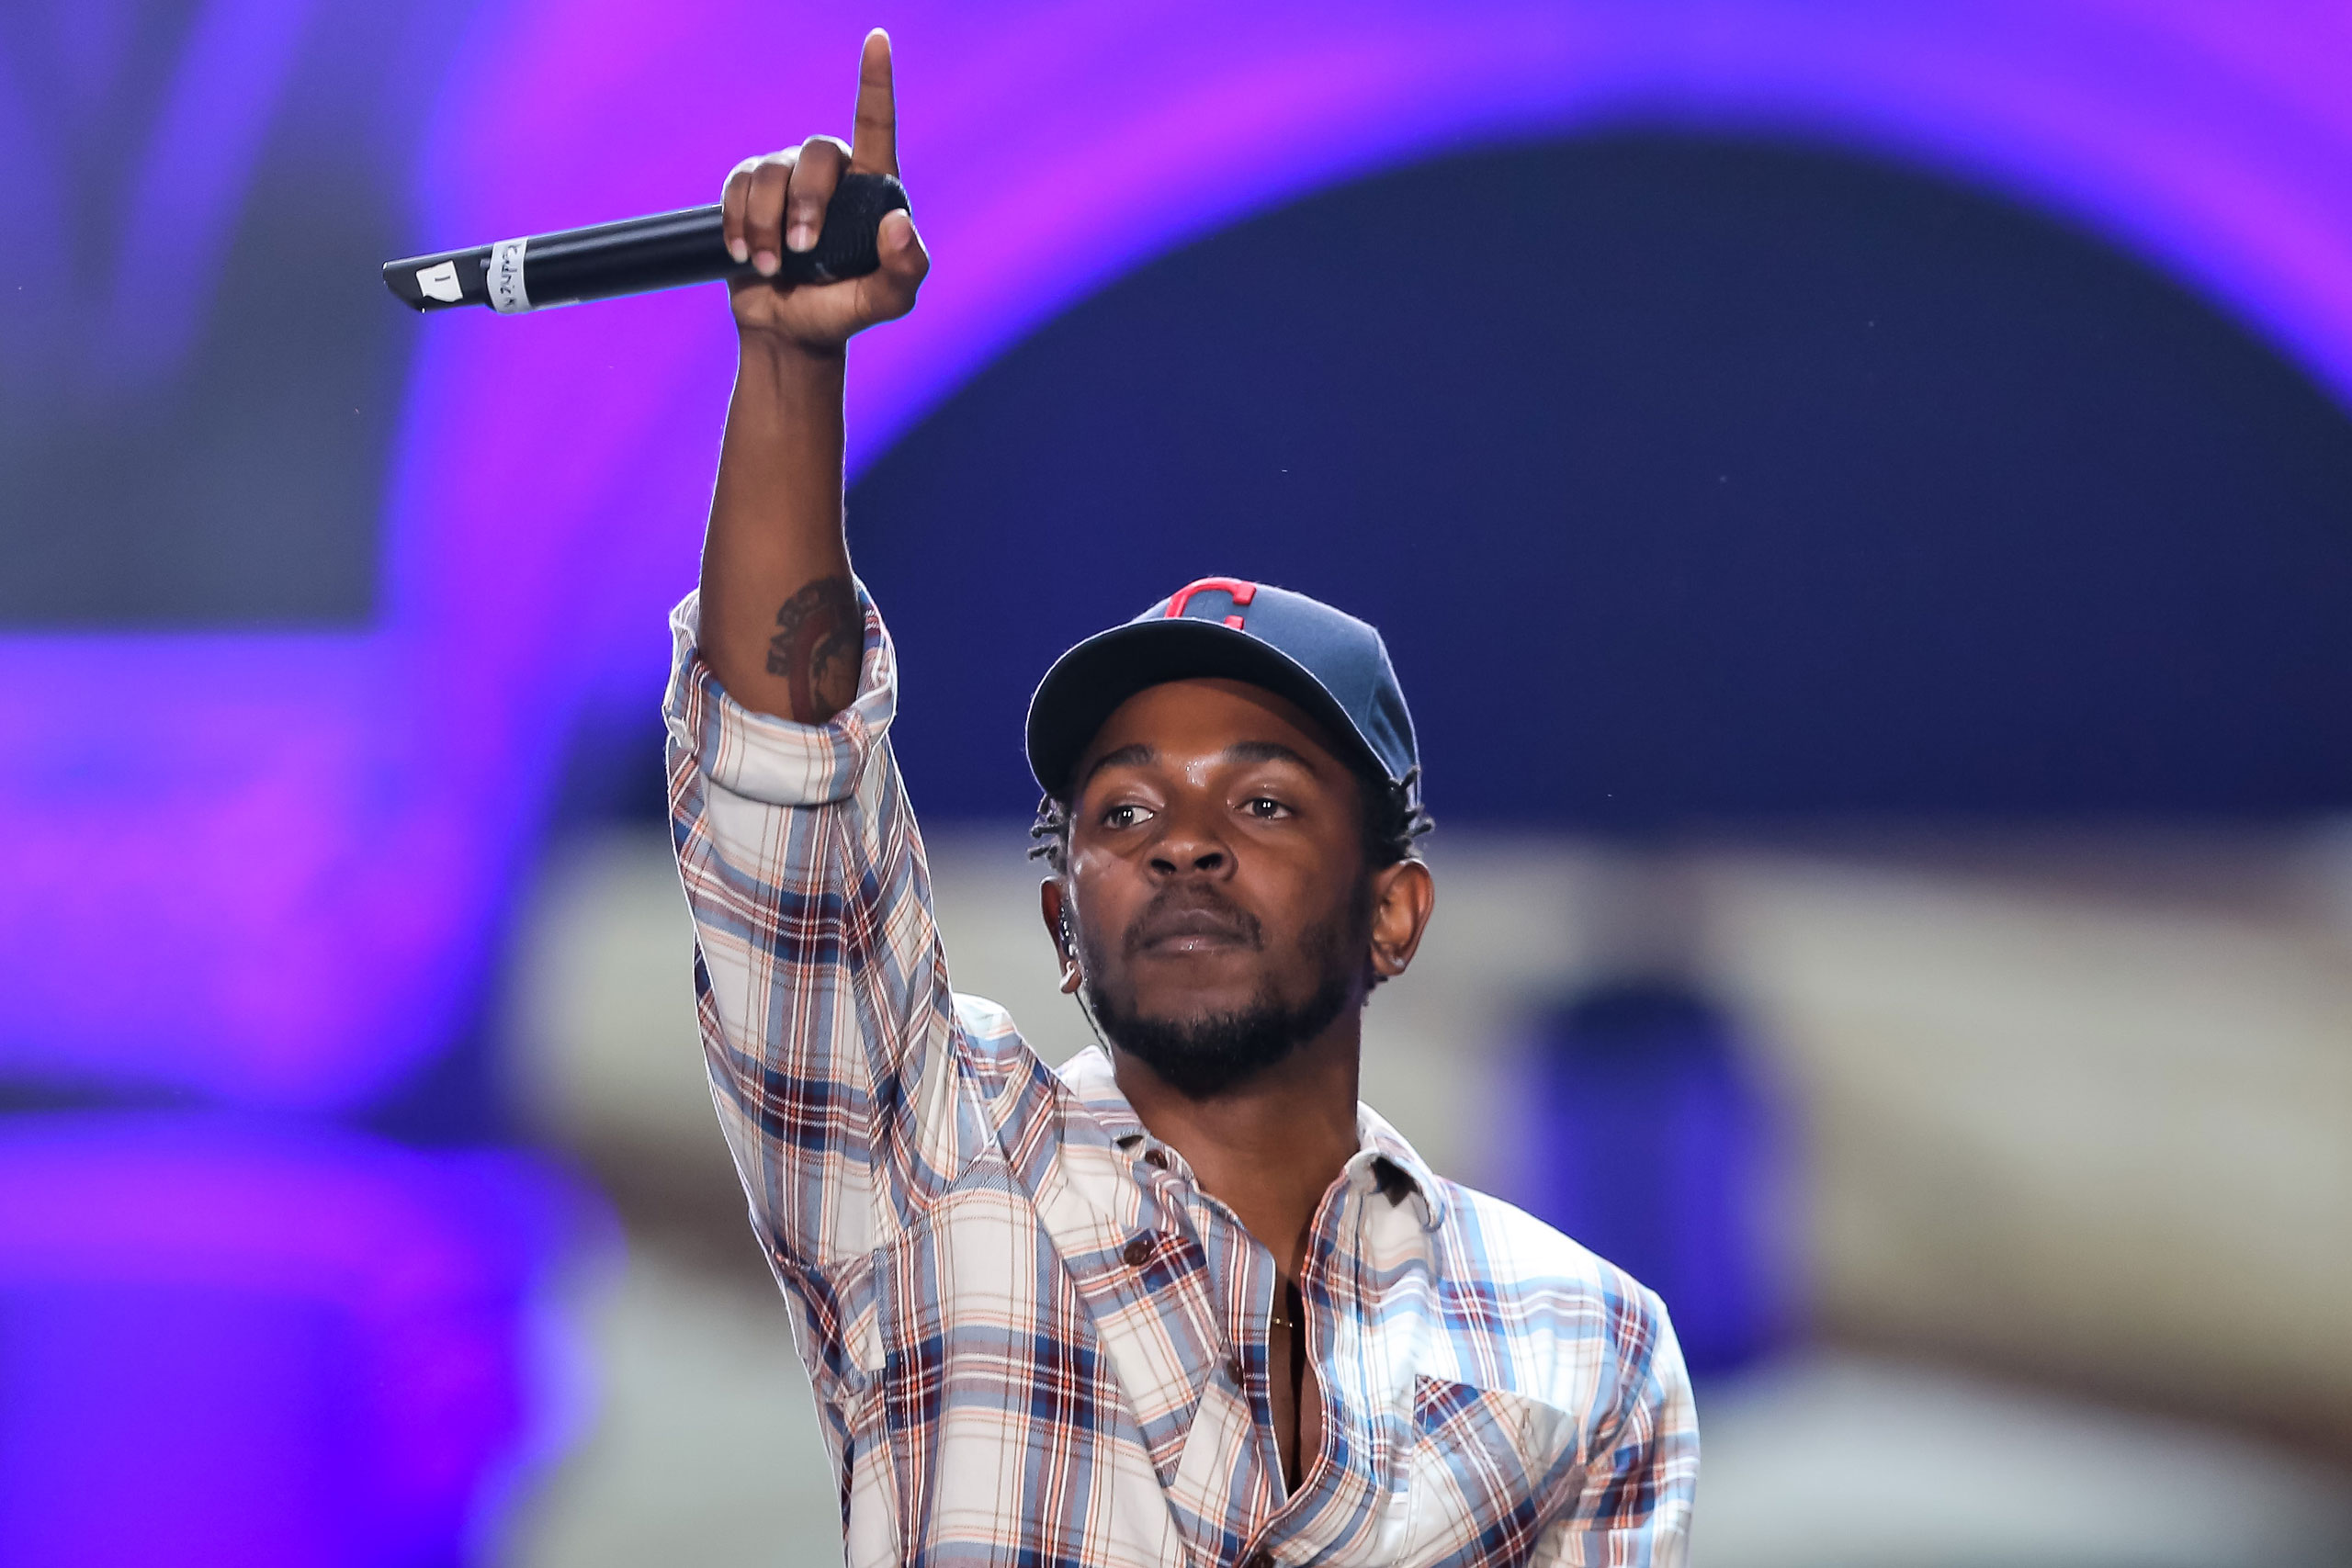 Rapper Kendrick Lamar performs during Day 1 of the Budweiser Made in America festival at Los Angeles Grand Park on Aug. 30, 2014 in Los Angeles. (Chelsea Lauren—WireImage/Getty Images)